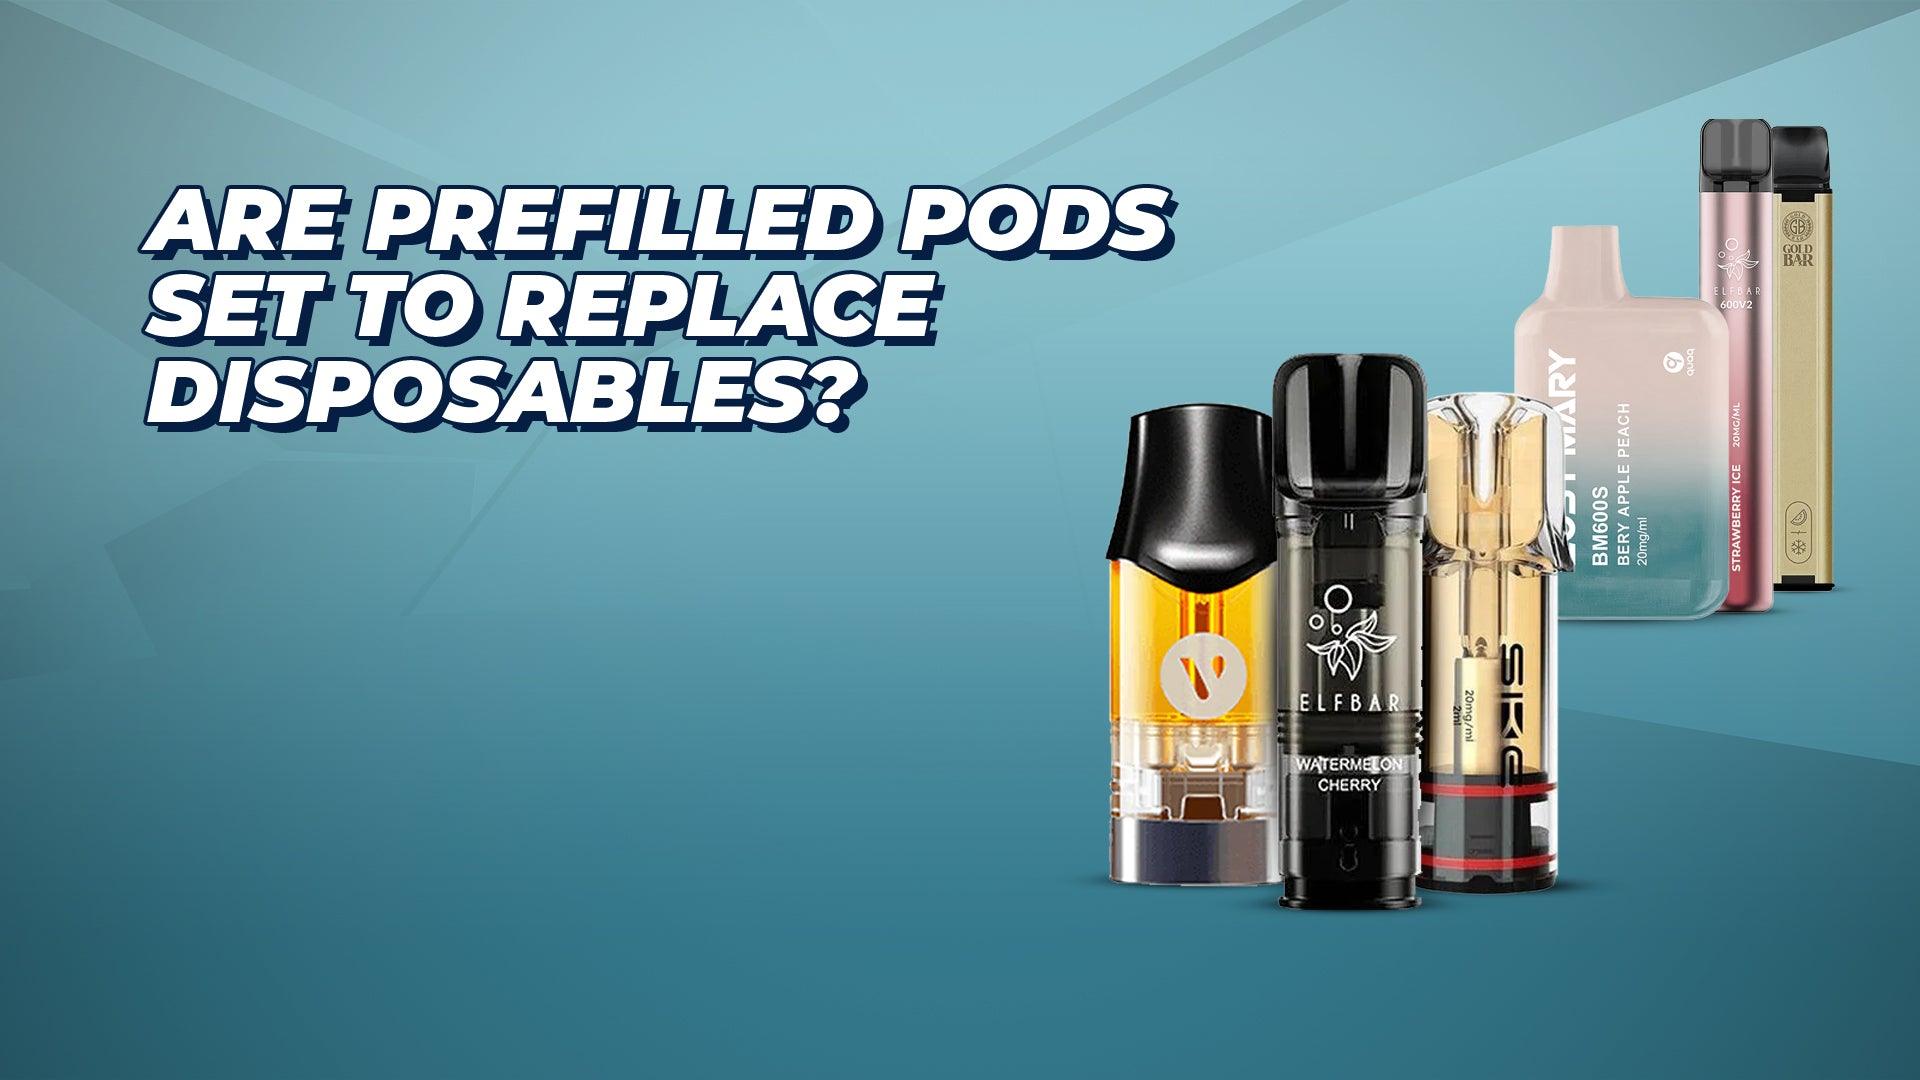 Are Prefilled Pods Set To Replace Disposables? - Category:Pods & Cartridges, Category:Vape Kits, Sub Category:Disposables, Sub Category:Pod Kits, Sub Category:Prefilled Pods